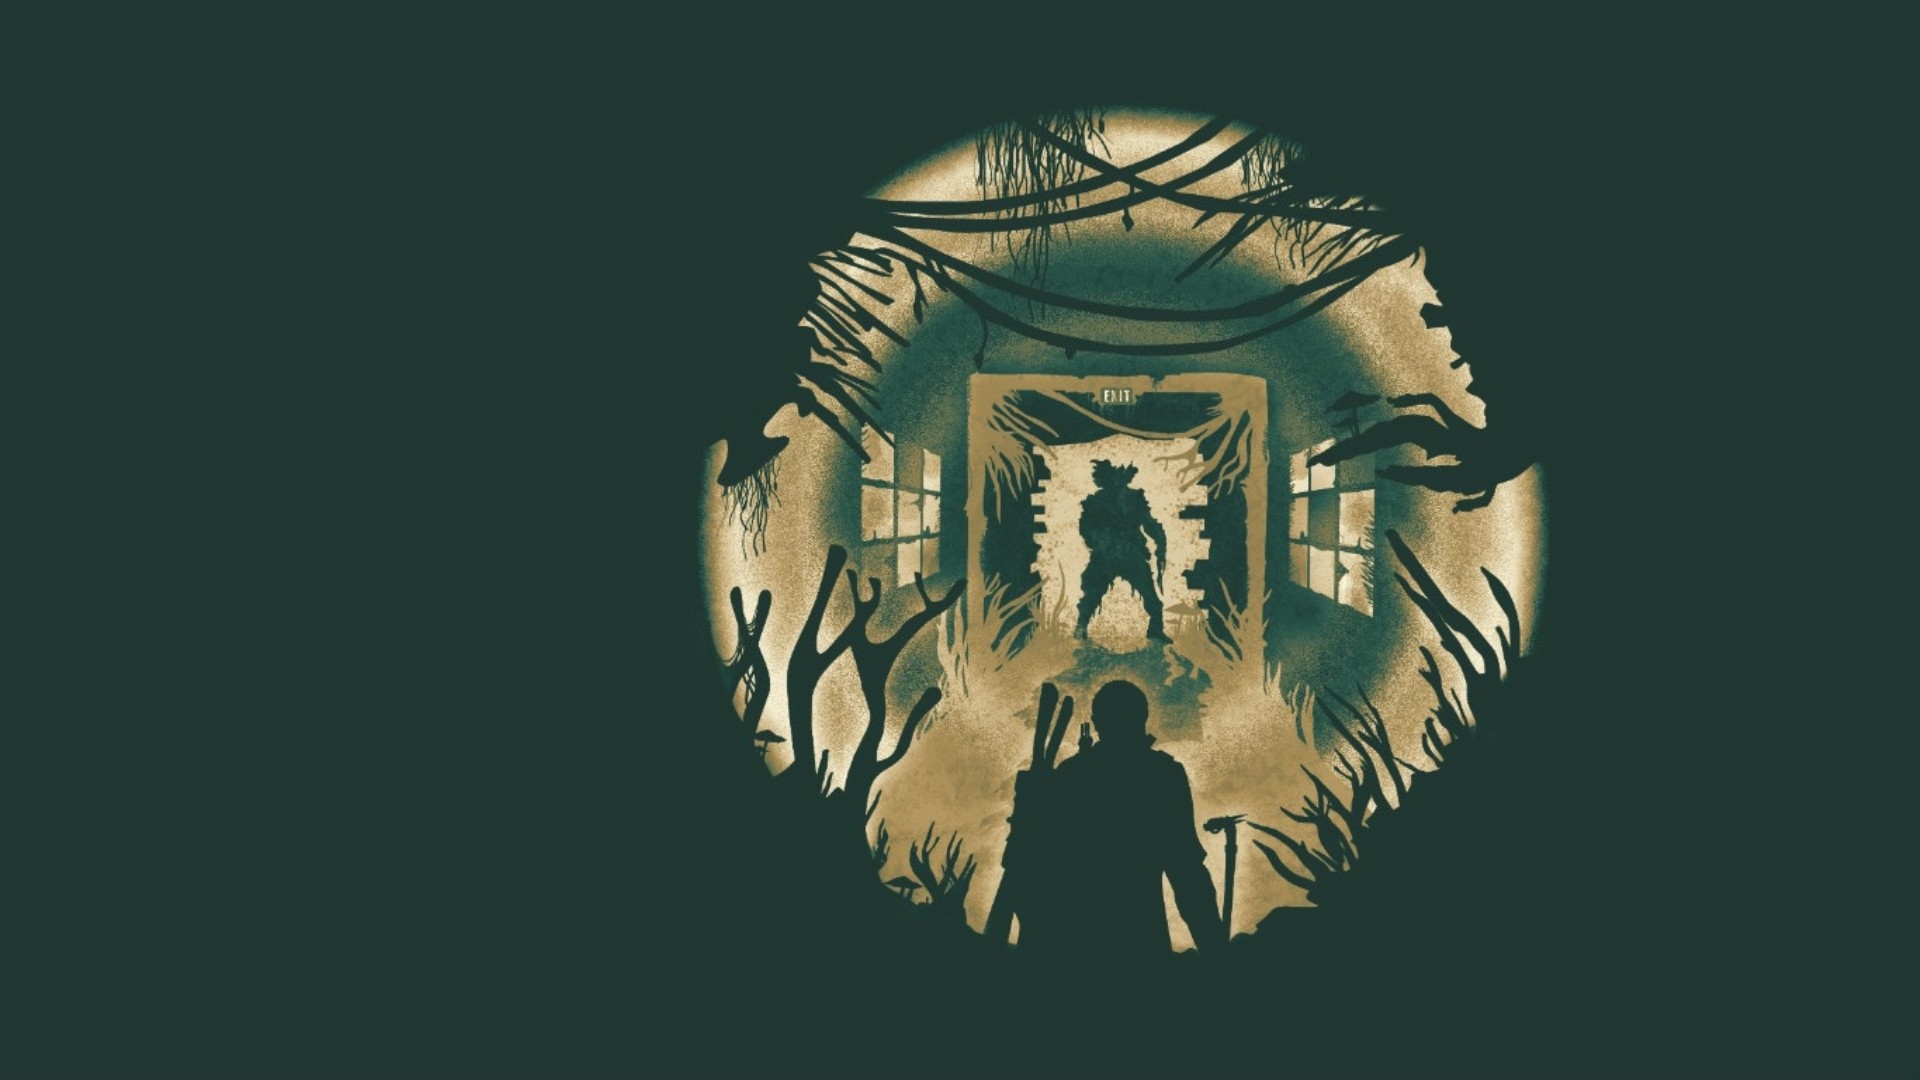 General 1920x1080 The Last of Us minimalism video games video game art horror simple background